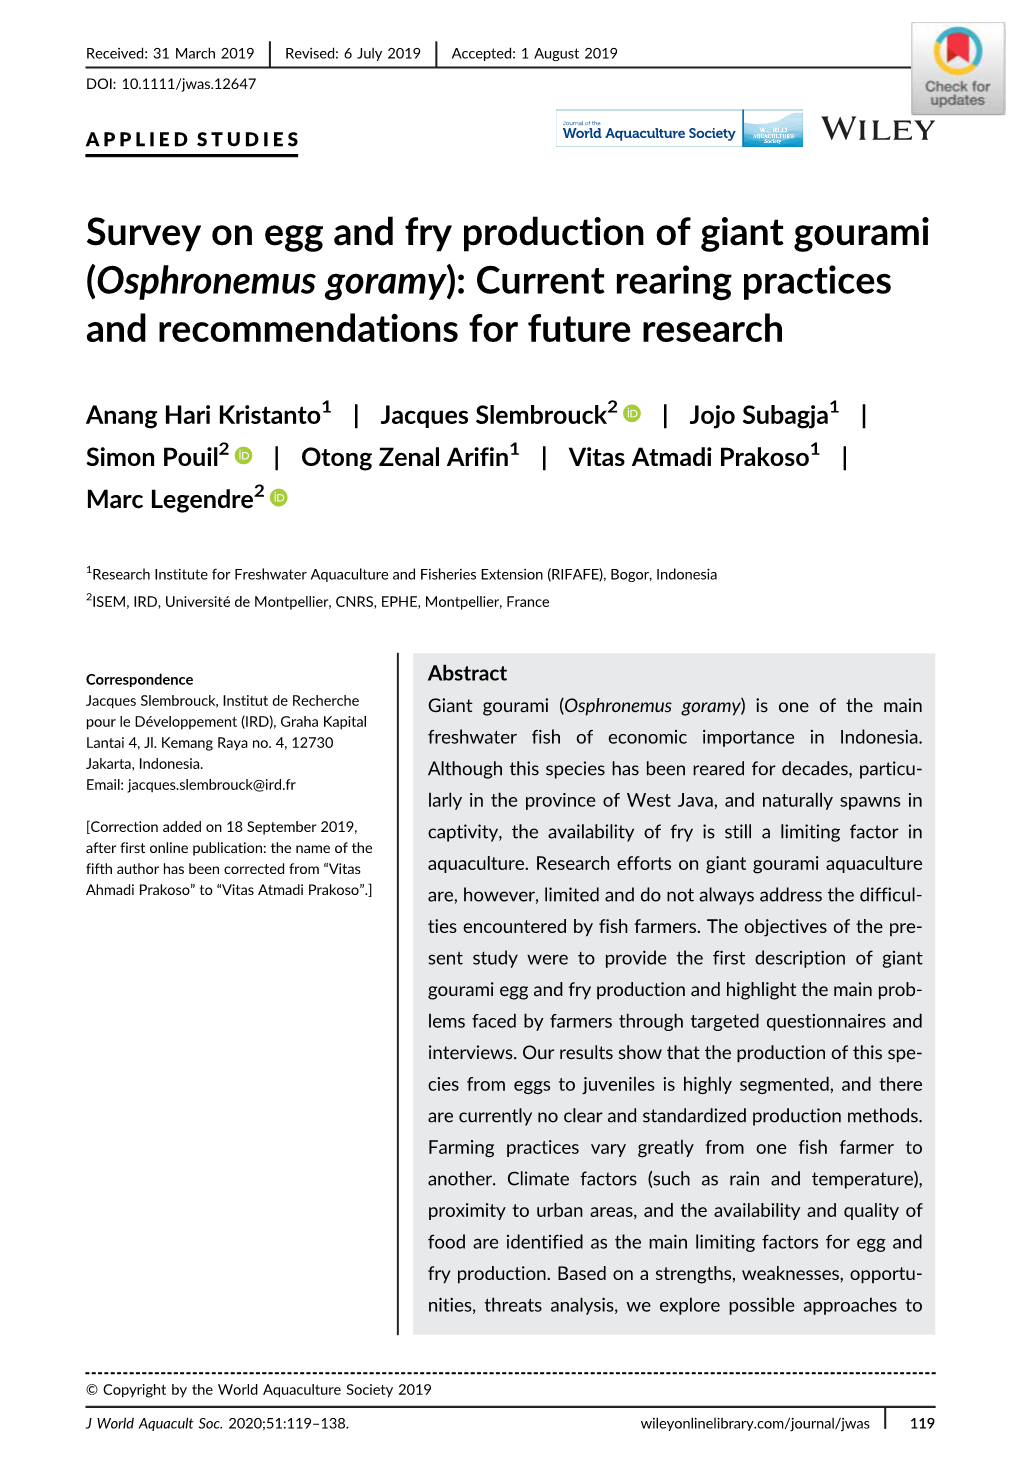 Survey on Egg and Fry Production of Giant Gourami (Osphronemus Goramy): Current Rearing Practices and Recommendations for Future Research